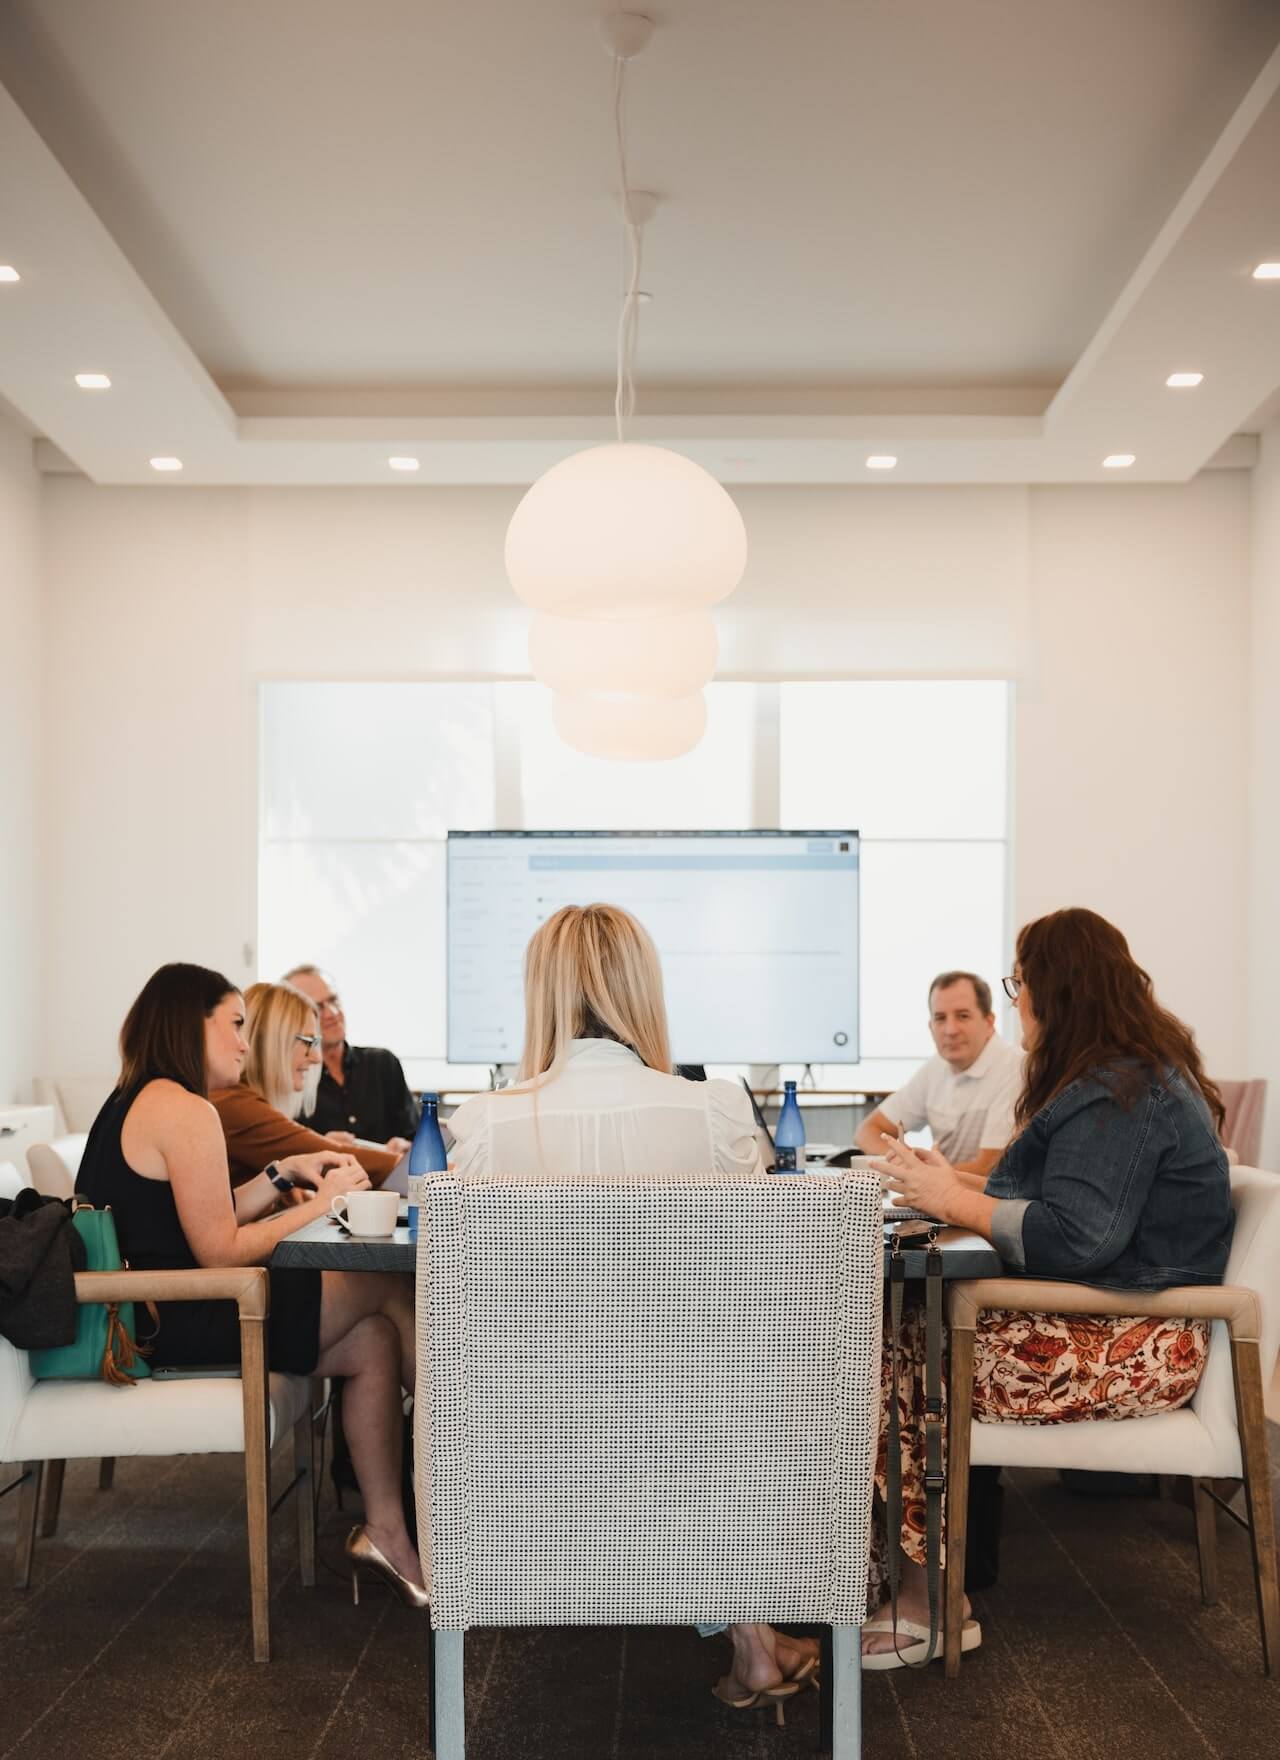 Employees seated around a table having a discussion around a table. Display screen in the background.